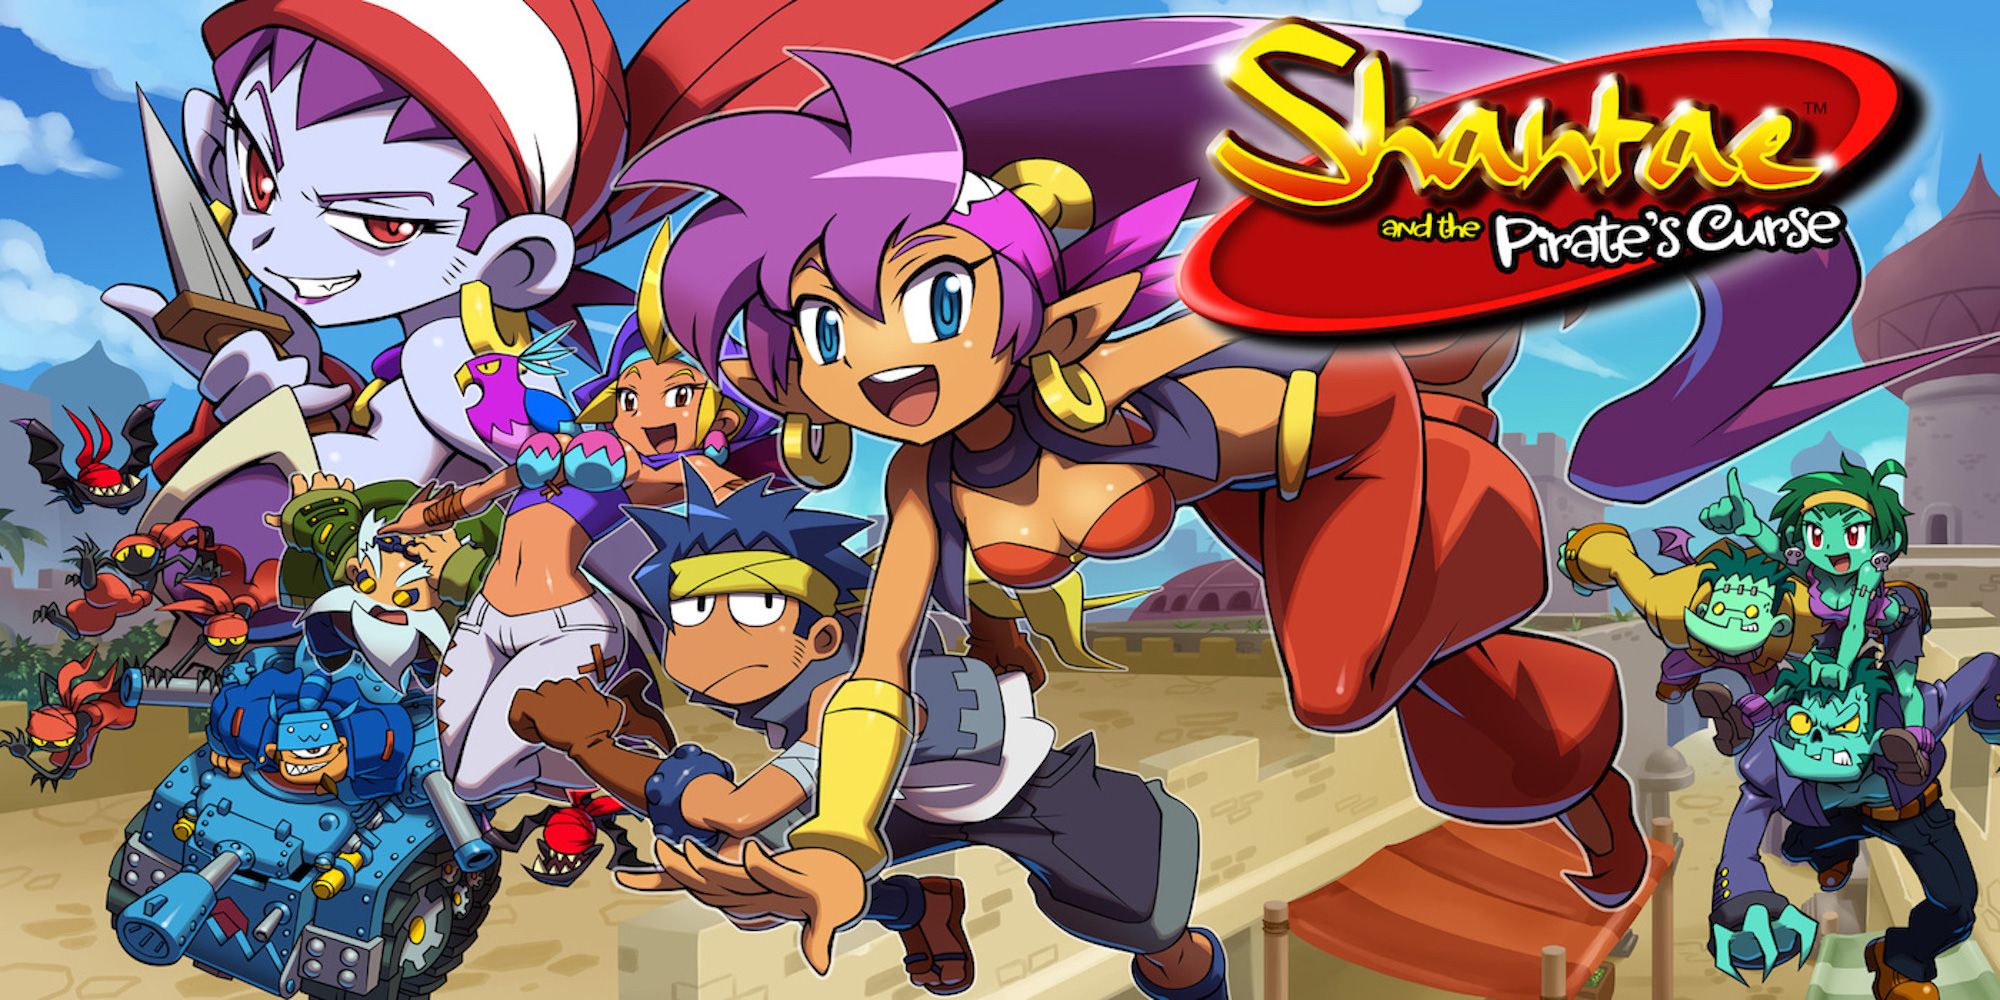 Promo art featuring characters from Shantae And The Pirate's Curse